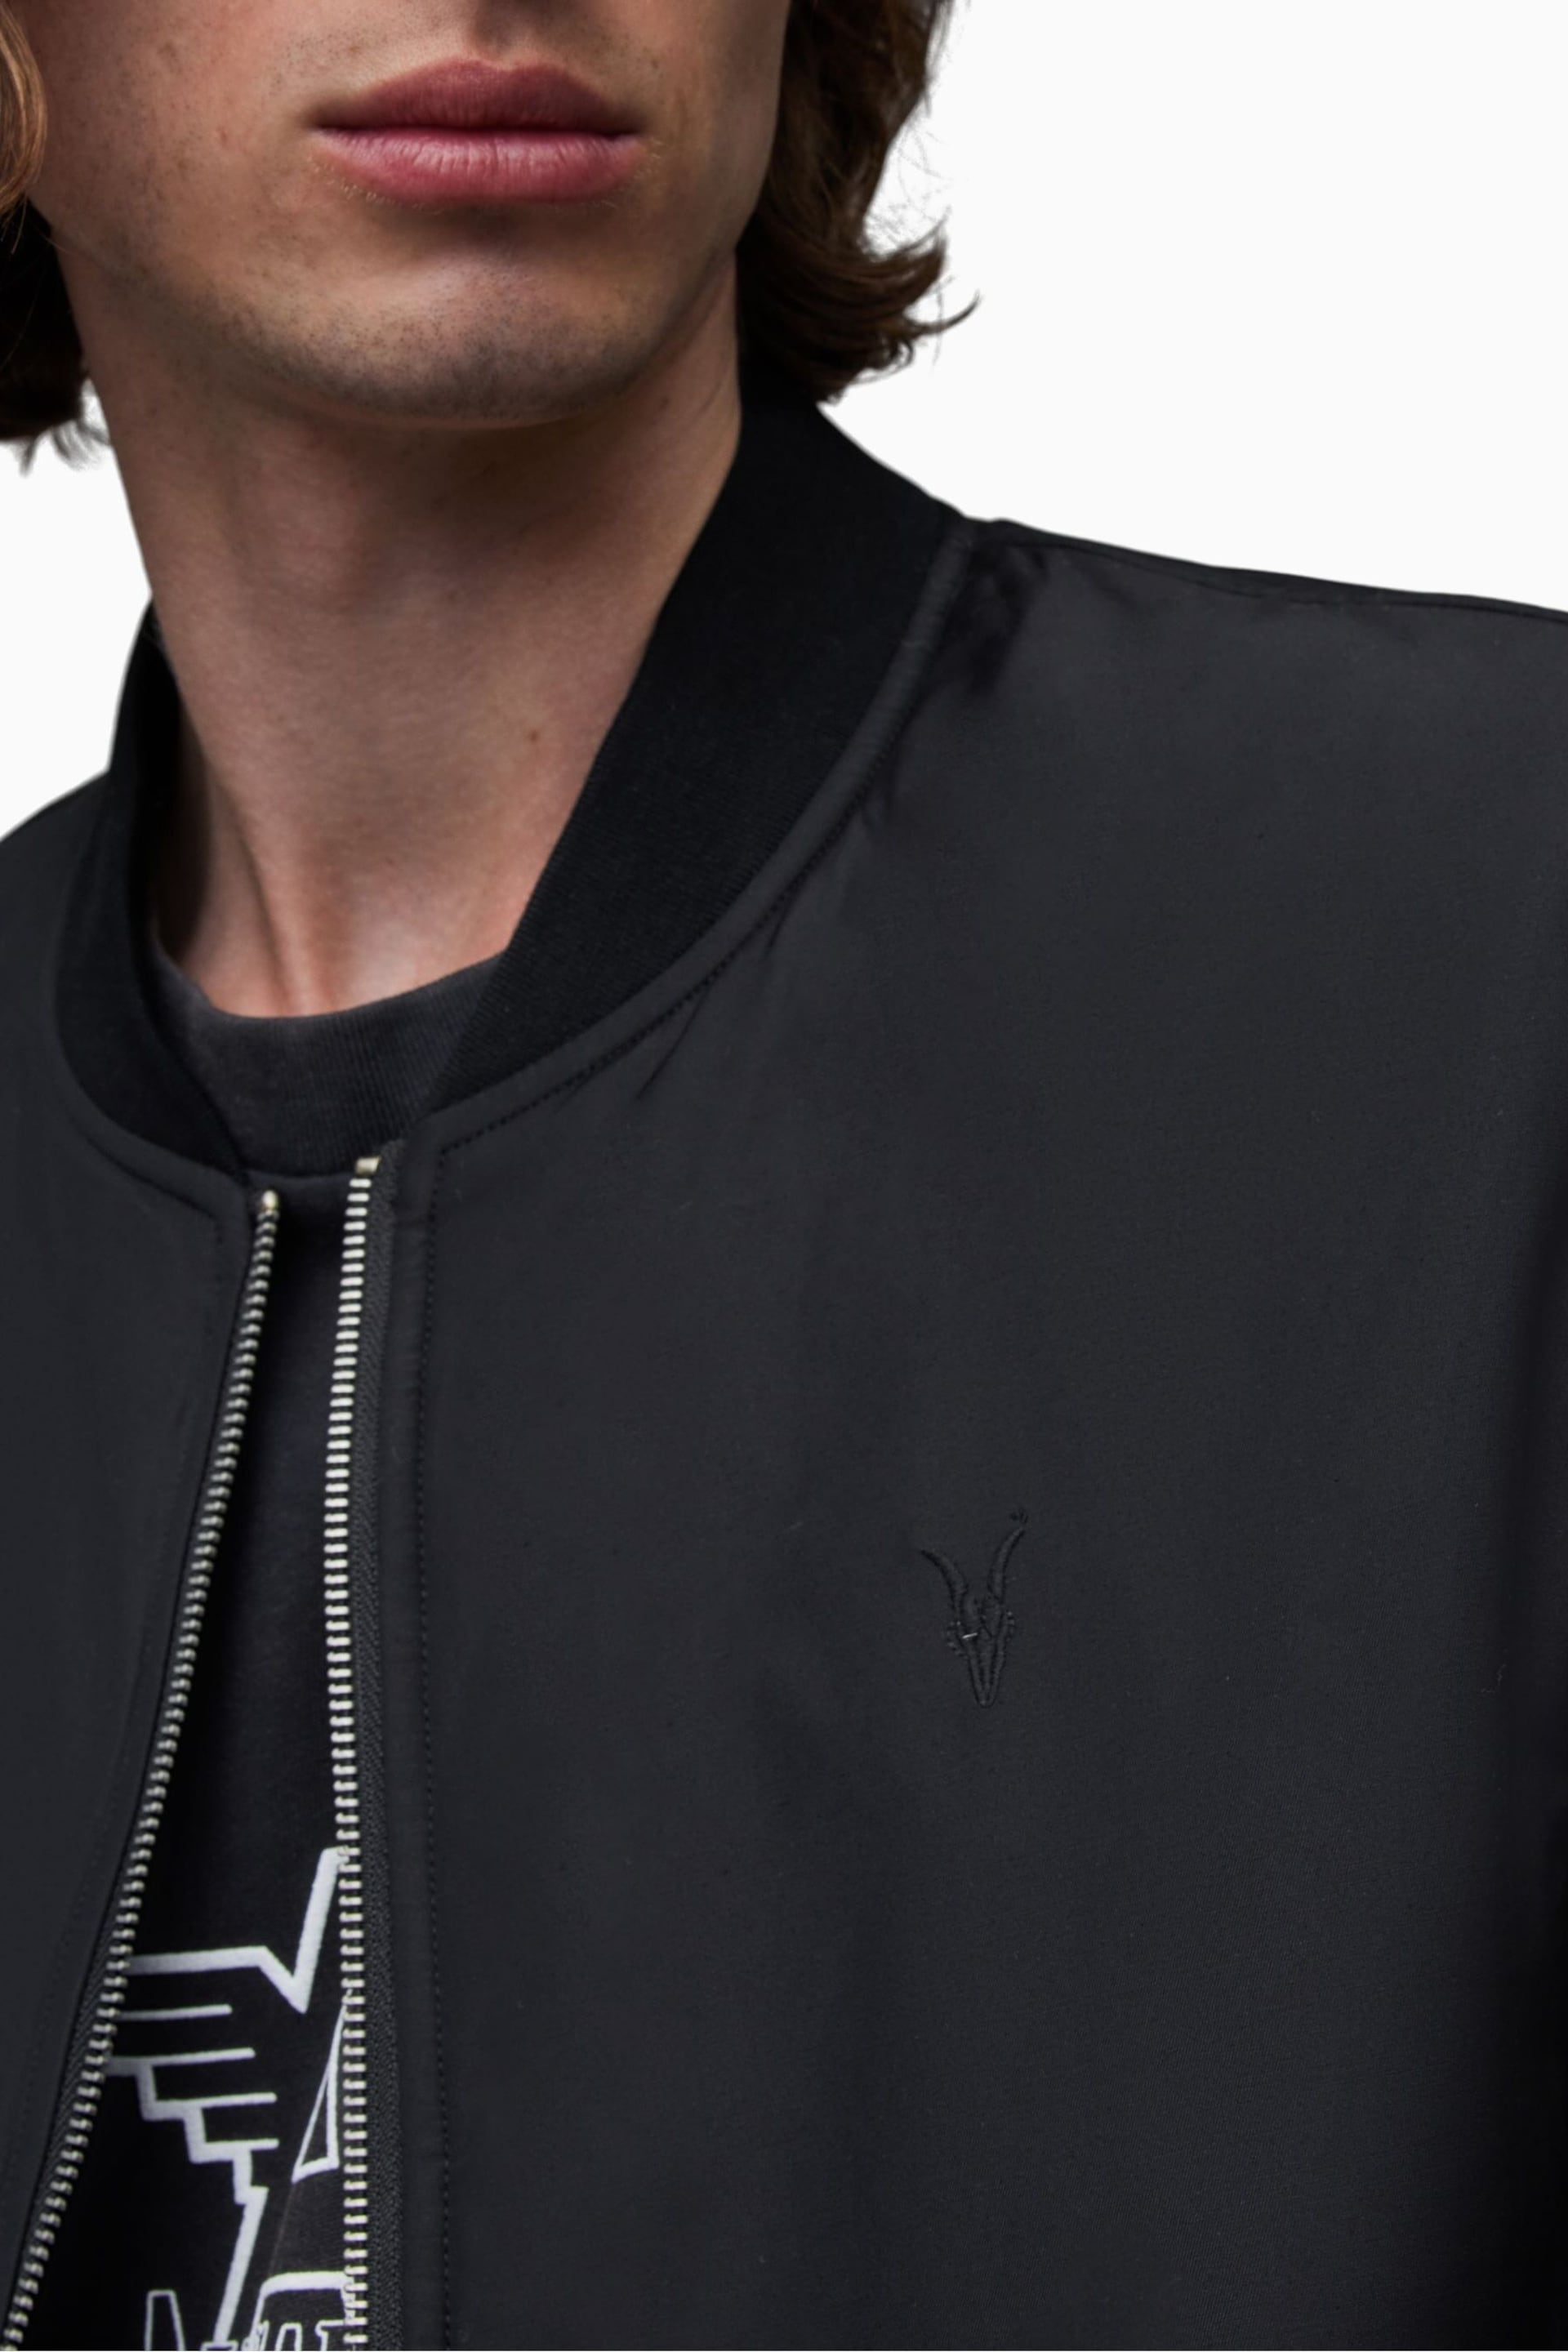 AllSaints Black Withrow Bomber Jacket - Image 6 of 7